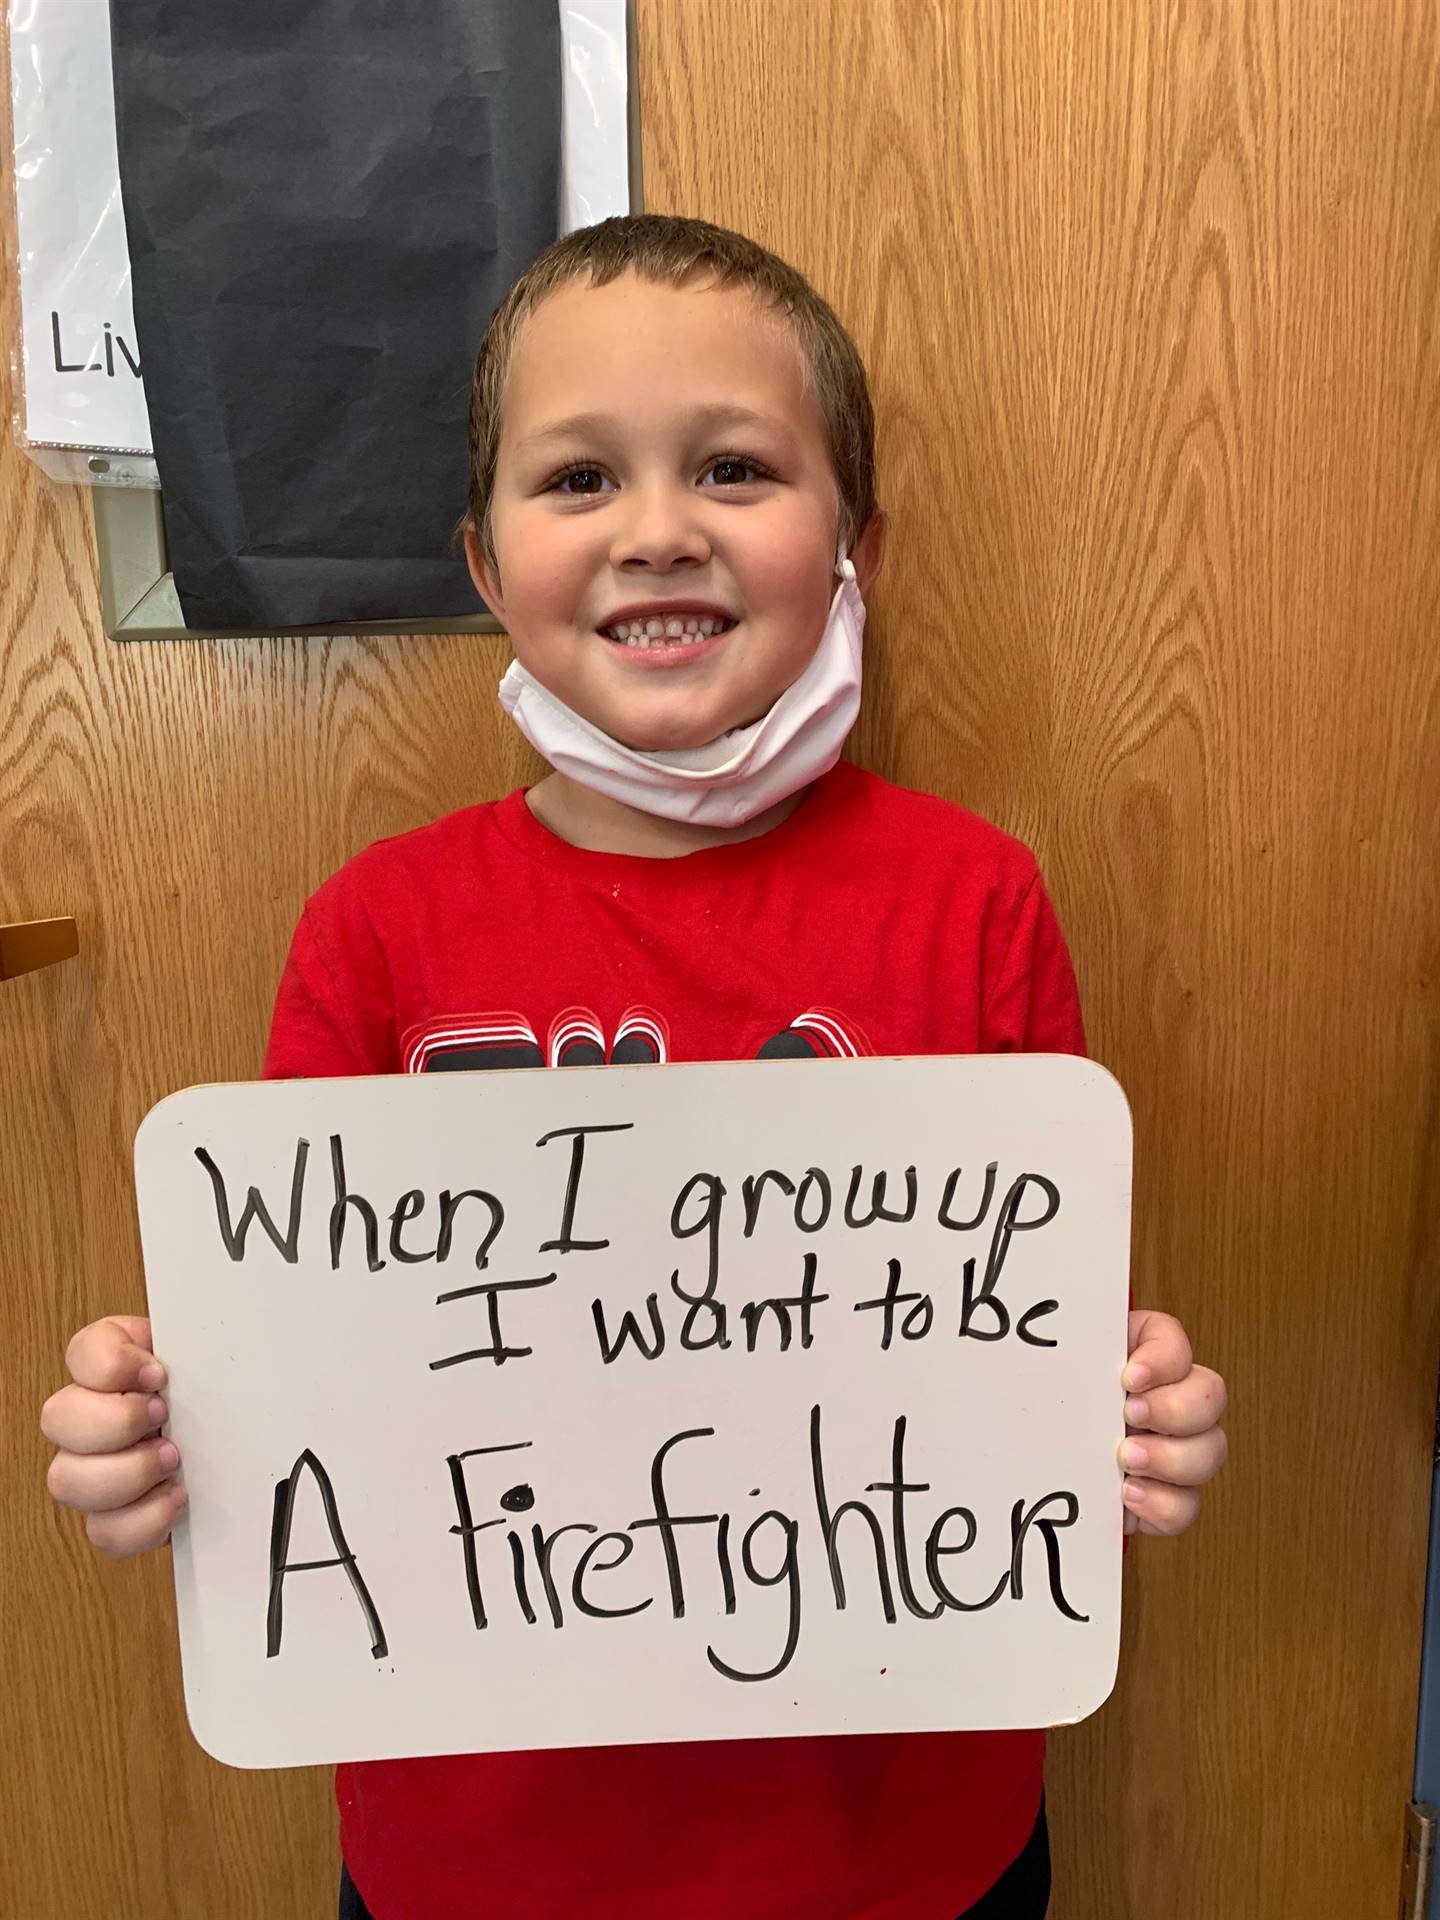 child holding sign "when i grow up I want to be a firefighter"